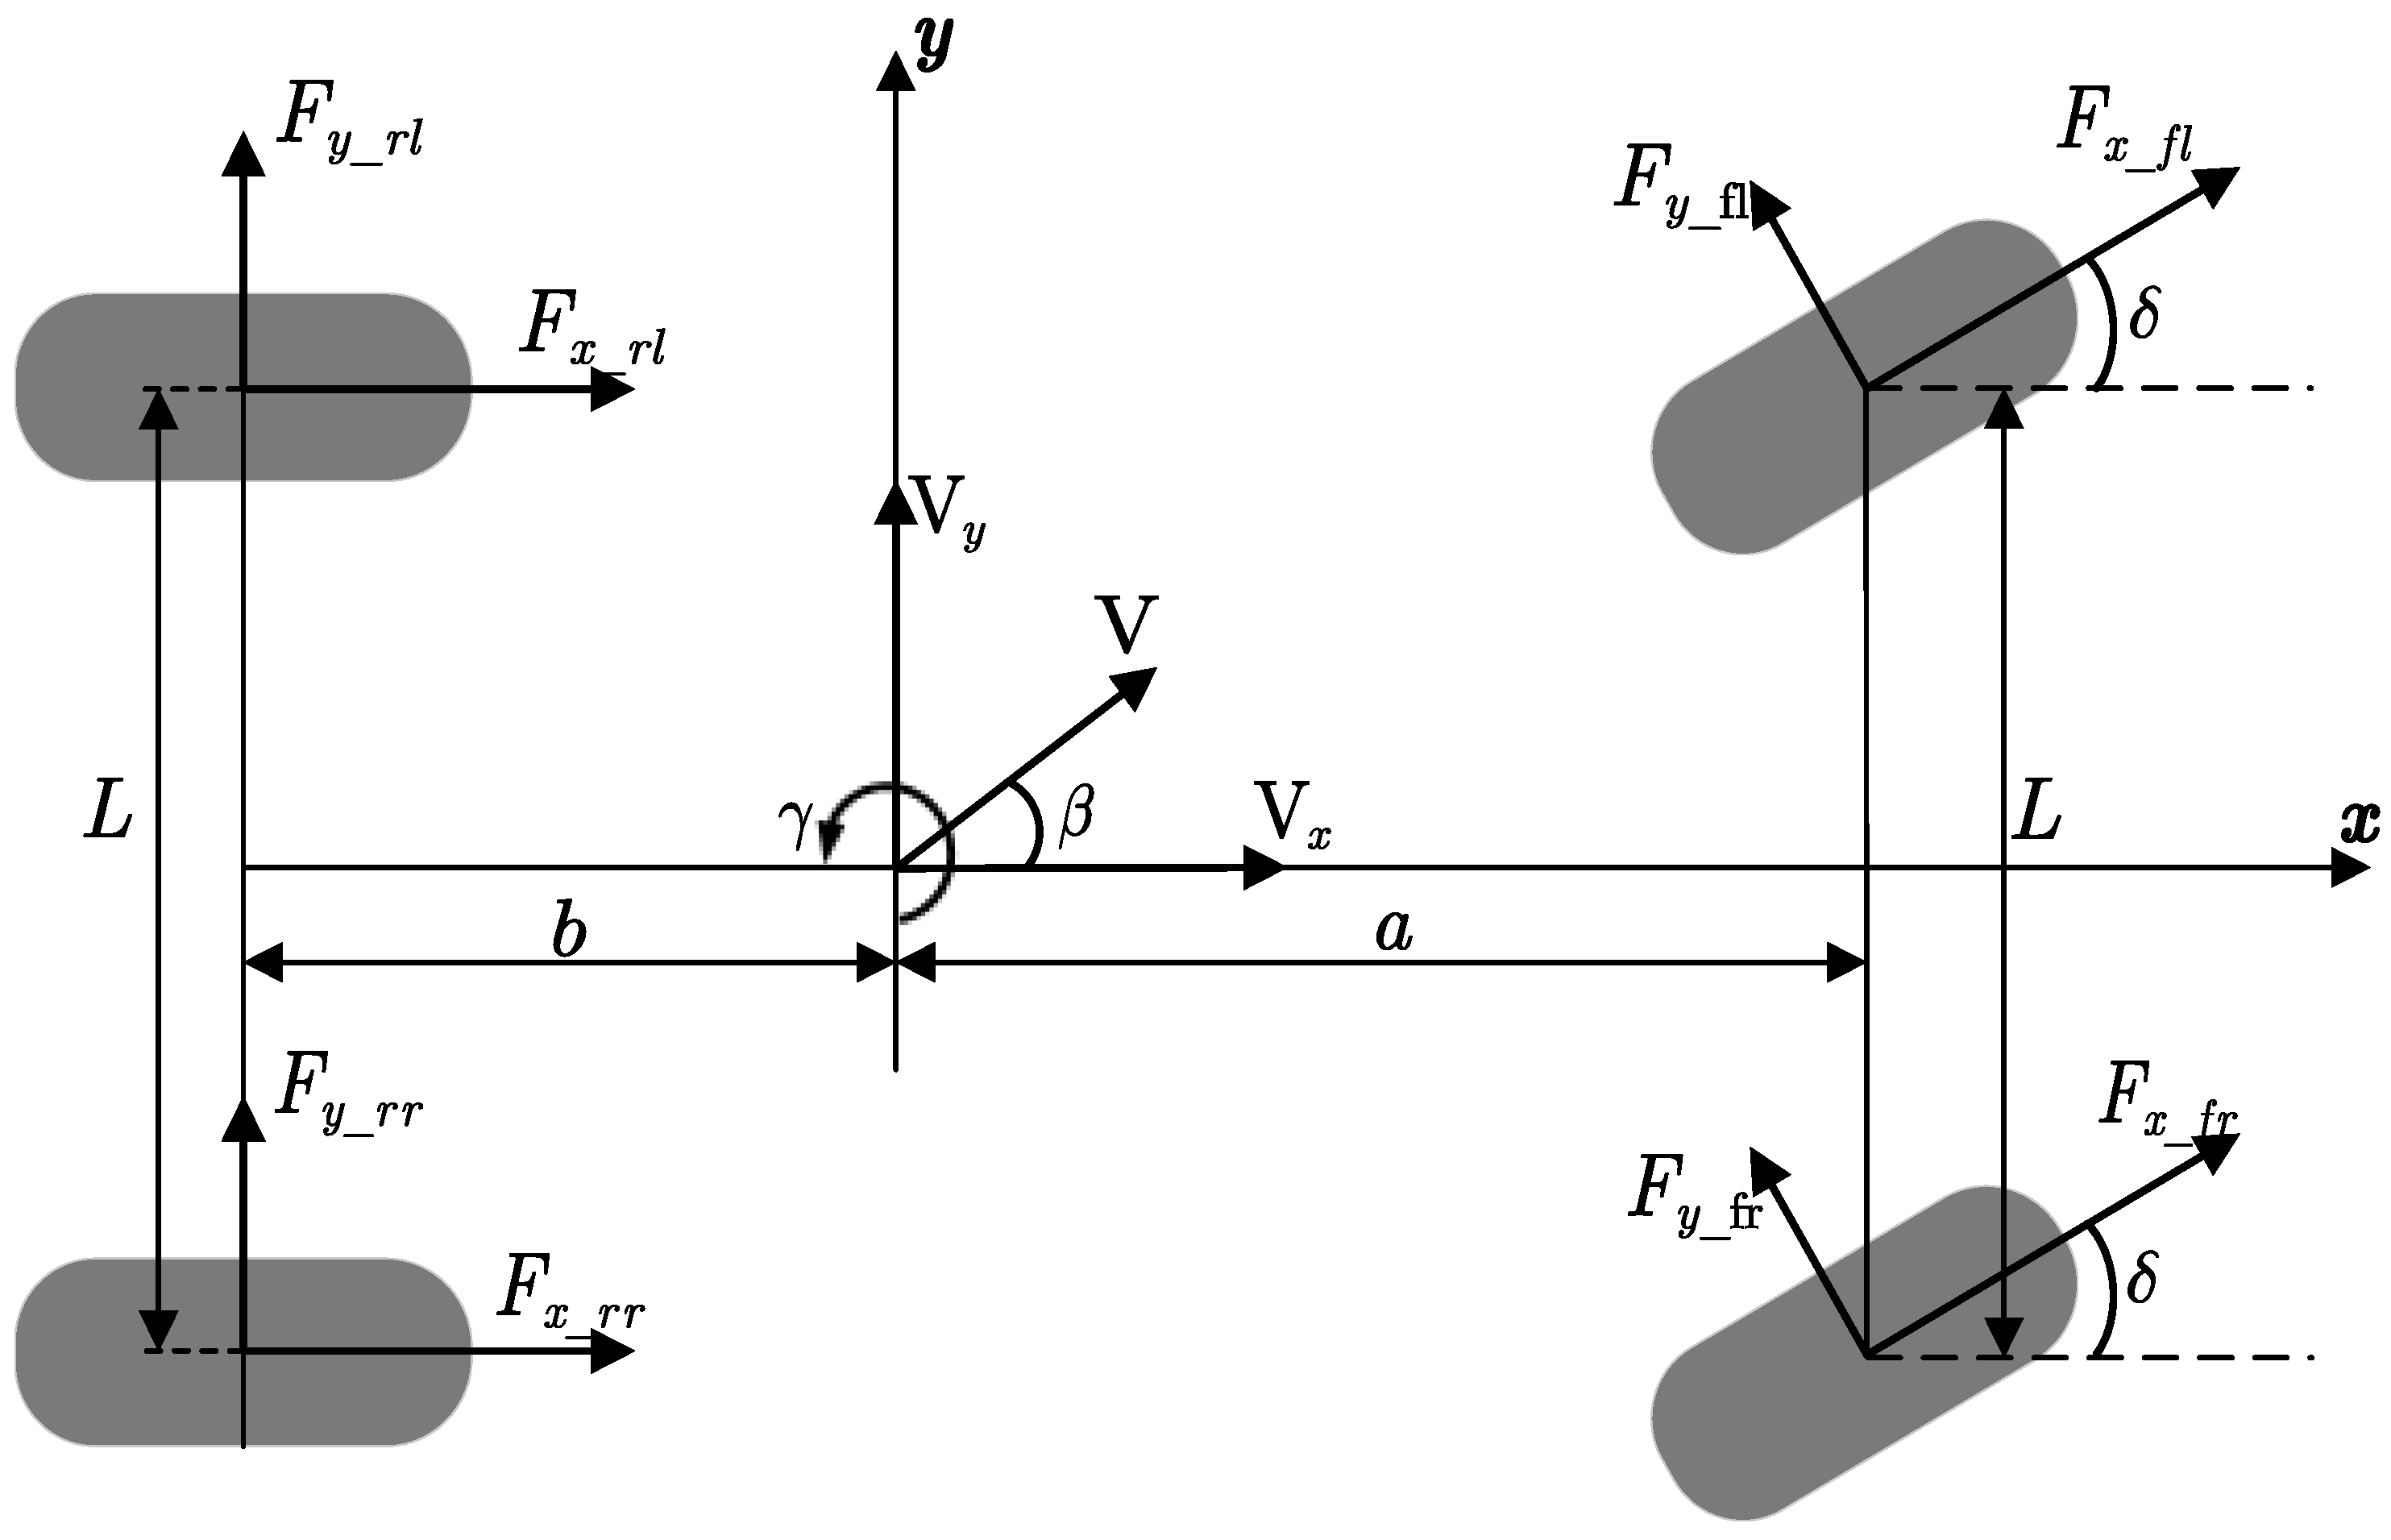 Actuators | Free Full-Text | Mechanism Analysis and of Lateral Instability of 4WID Vehicle Based on Phase Plane Analysis Considering Wheel Angle